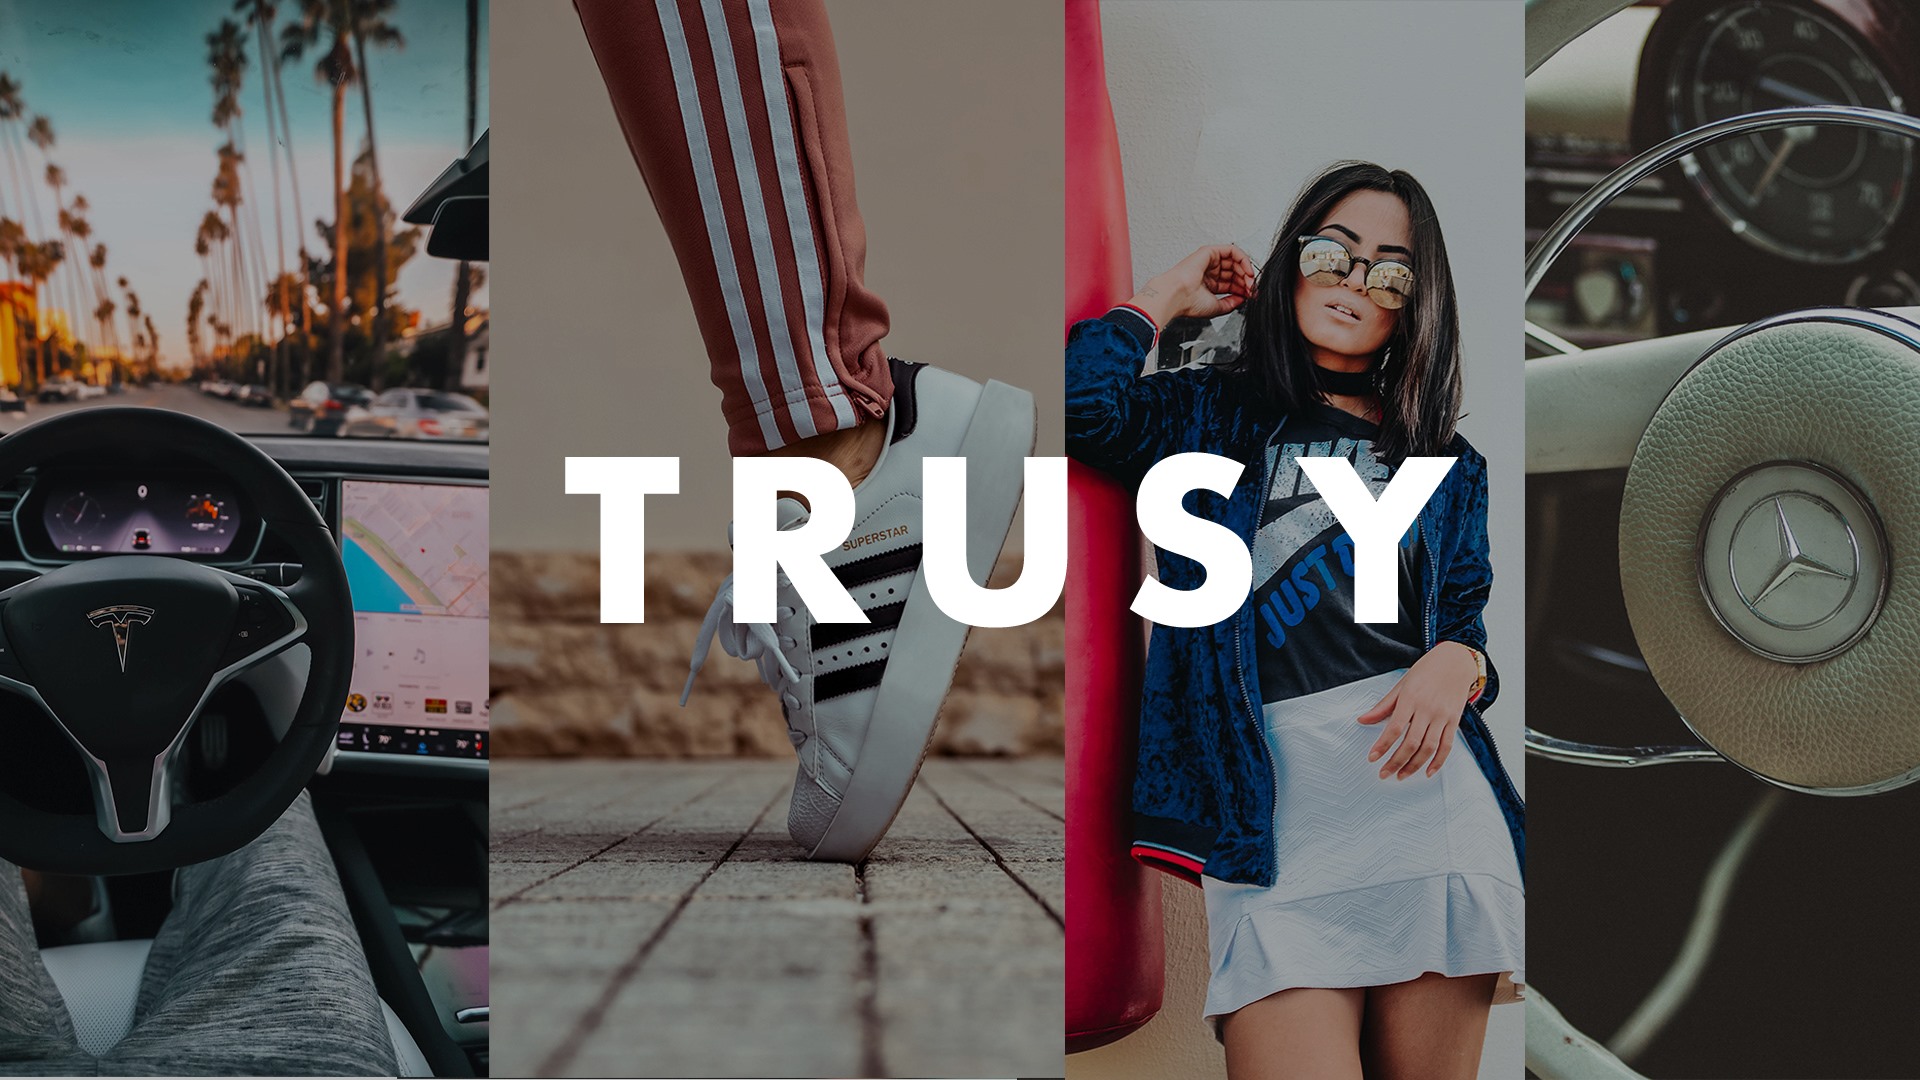 Meet Trusy: The Company Behind the Largest Instagram Influencers in the World